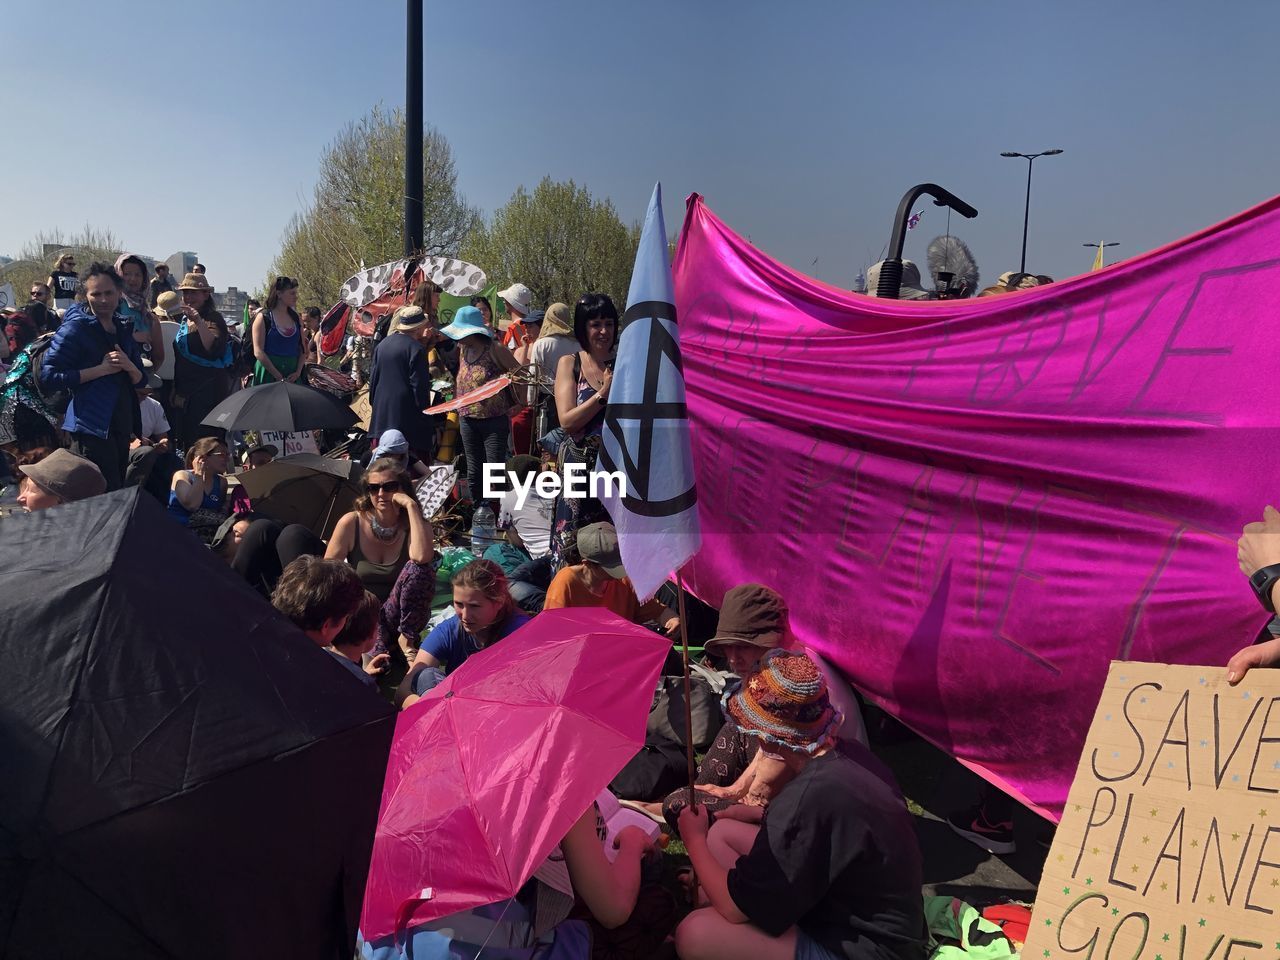 Extinction rebellion protesters on waterloo bridge during the april 2019 protests. 